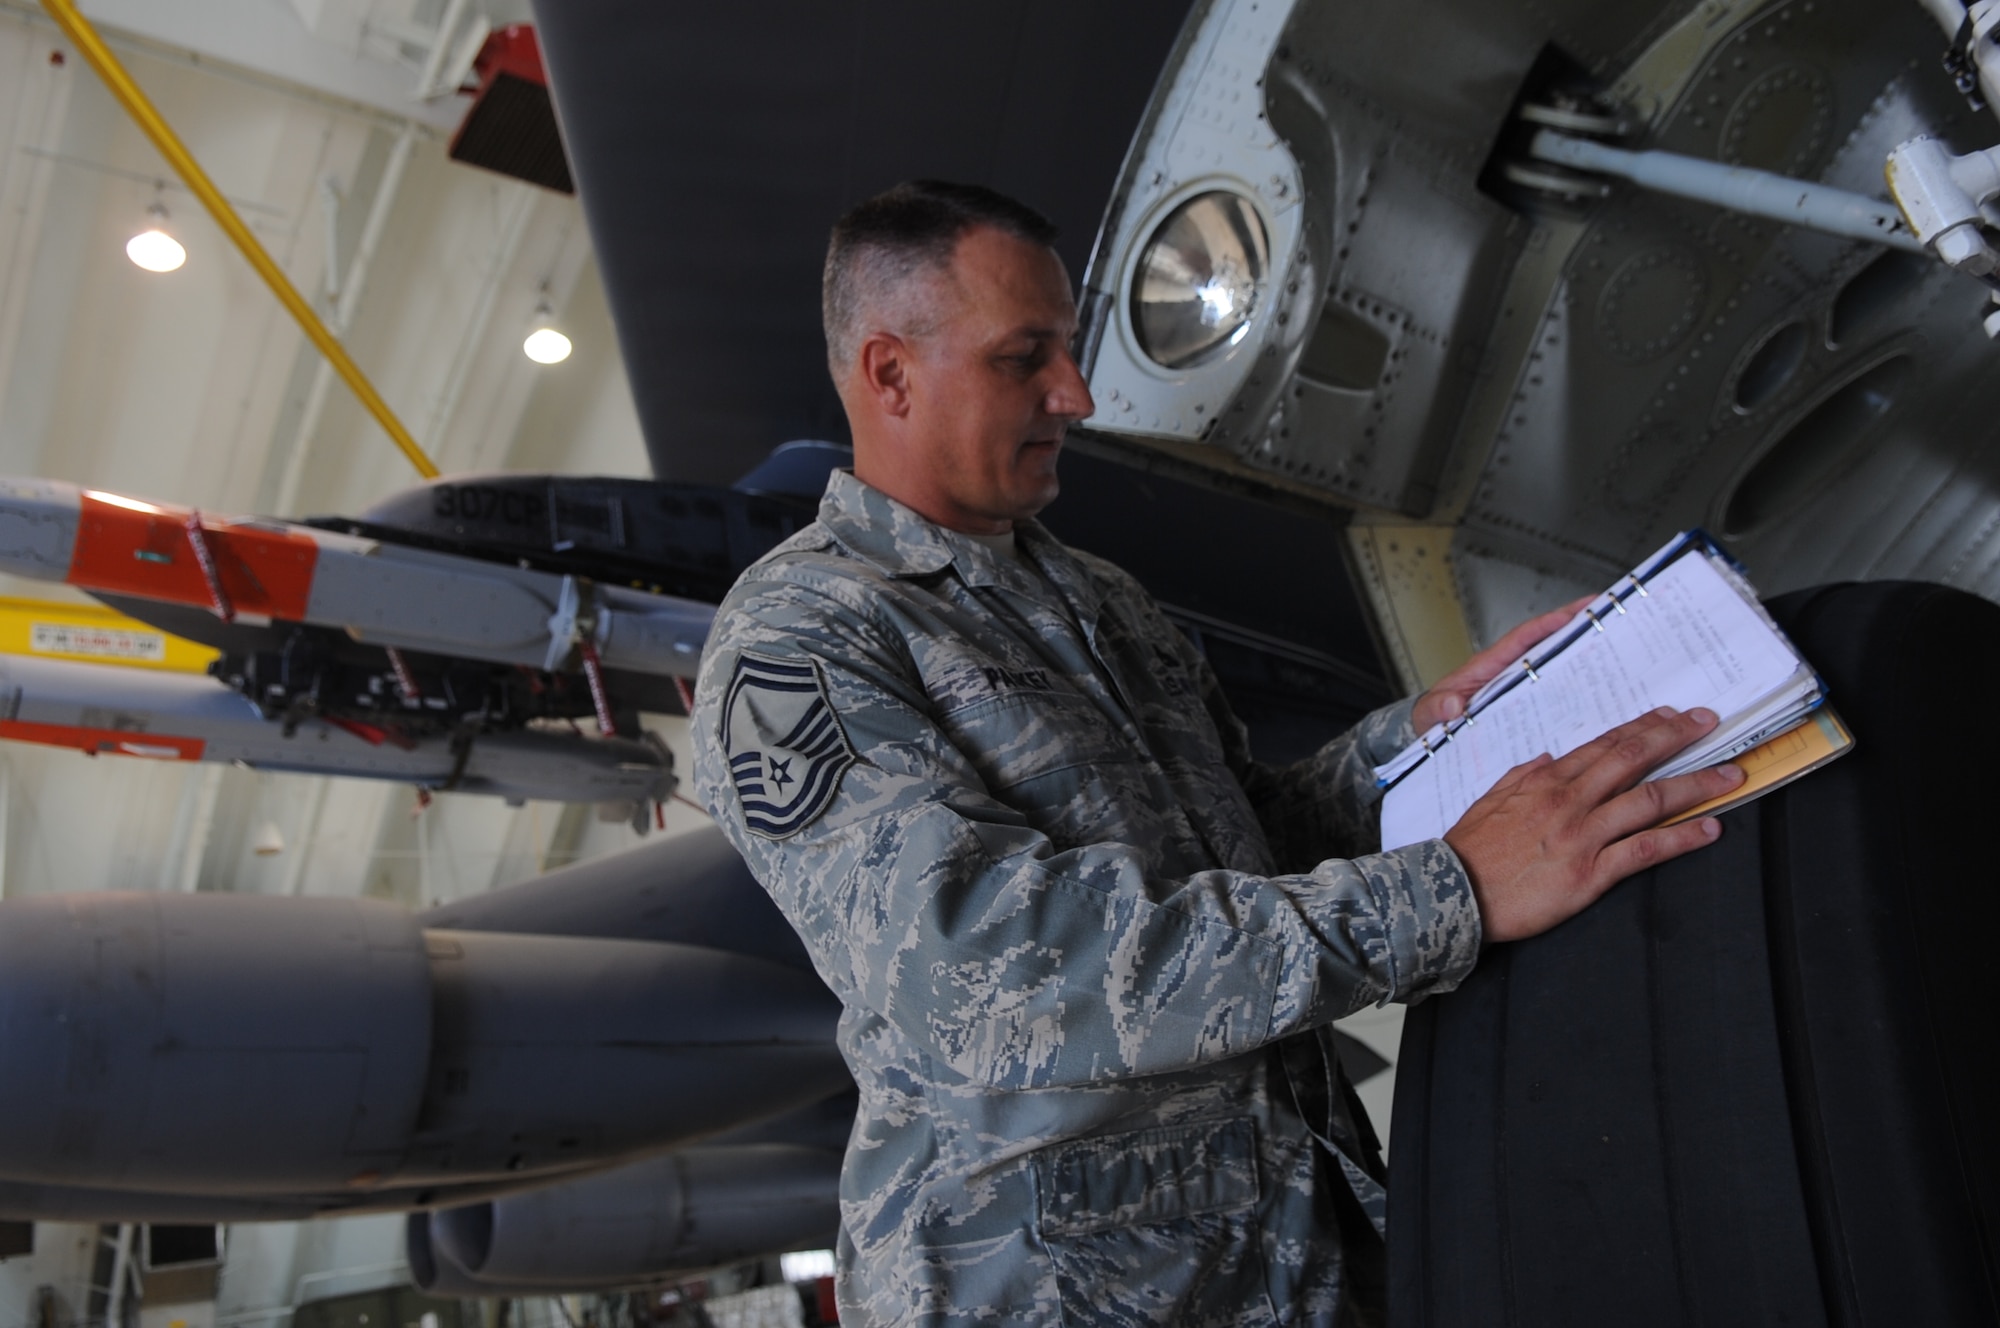 Senior Master Sgt. Carl Paskey looks at a technical order Aug. 11 on a B-52 Stratofortress while deployed to Andersen Air Force Base, Guam. Sergeant Paskey is the 96th Expeditionary Aircraft Maintenance Unit lead production superintendent. The Orwell, Ohio, native has been to Guam 31 times over 11 years.  He is currently deployed to Andersen supporting U.S. Pacific Command’s Continuous Bomber Presence mission in the Asia-Pacific region. (U.S. Air Force photo/Senior Airman Christopher Bush)